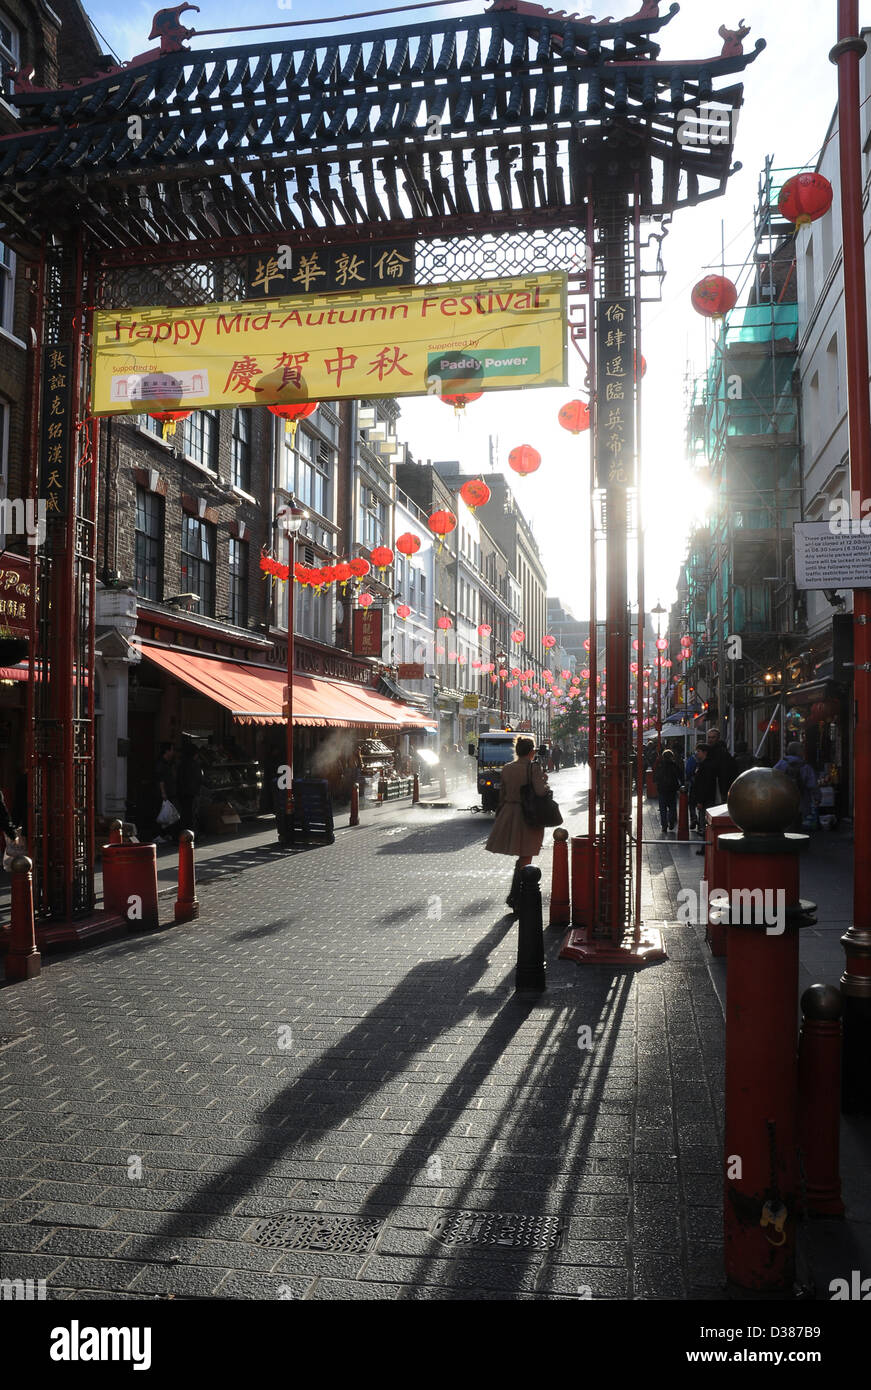 China town in London during the Chinese new year during a typical British rainy day. Stock Photo